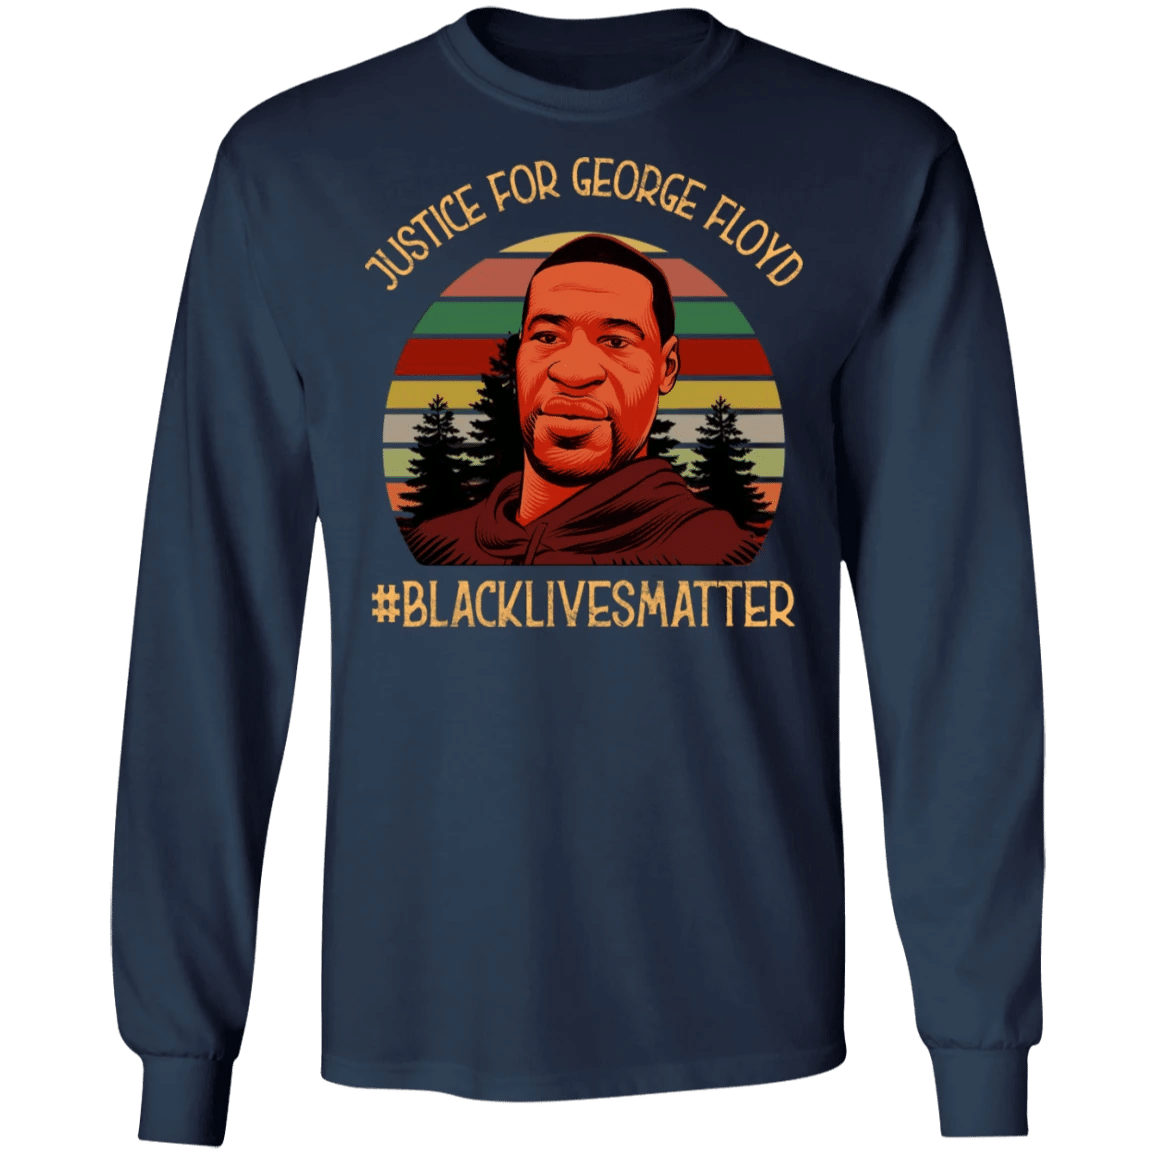 Justice For George Floyd Tee Sweatshirt Blm Say His Name lack Lives Matter